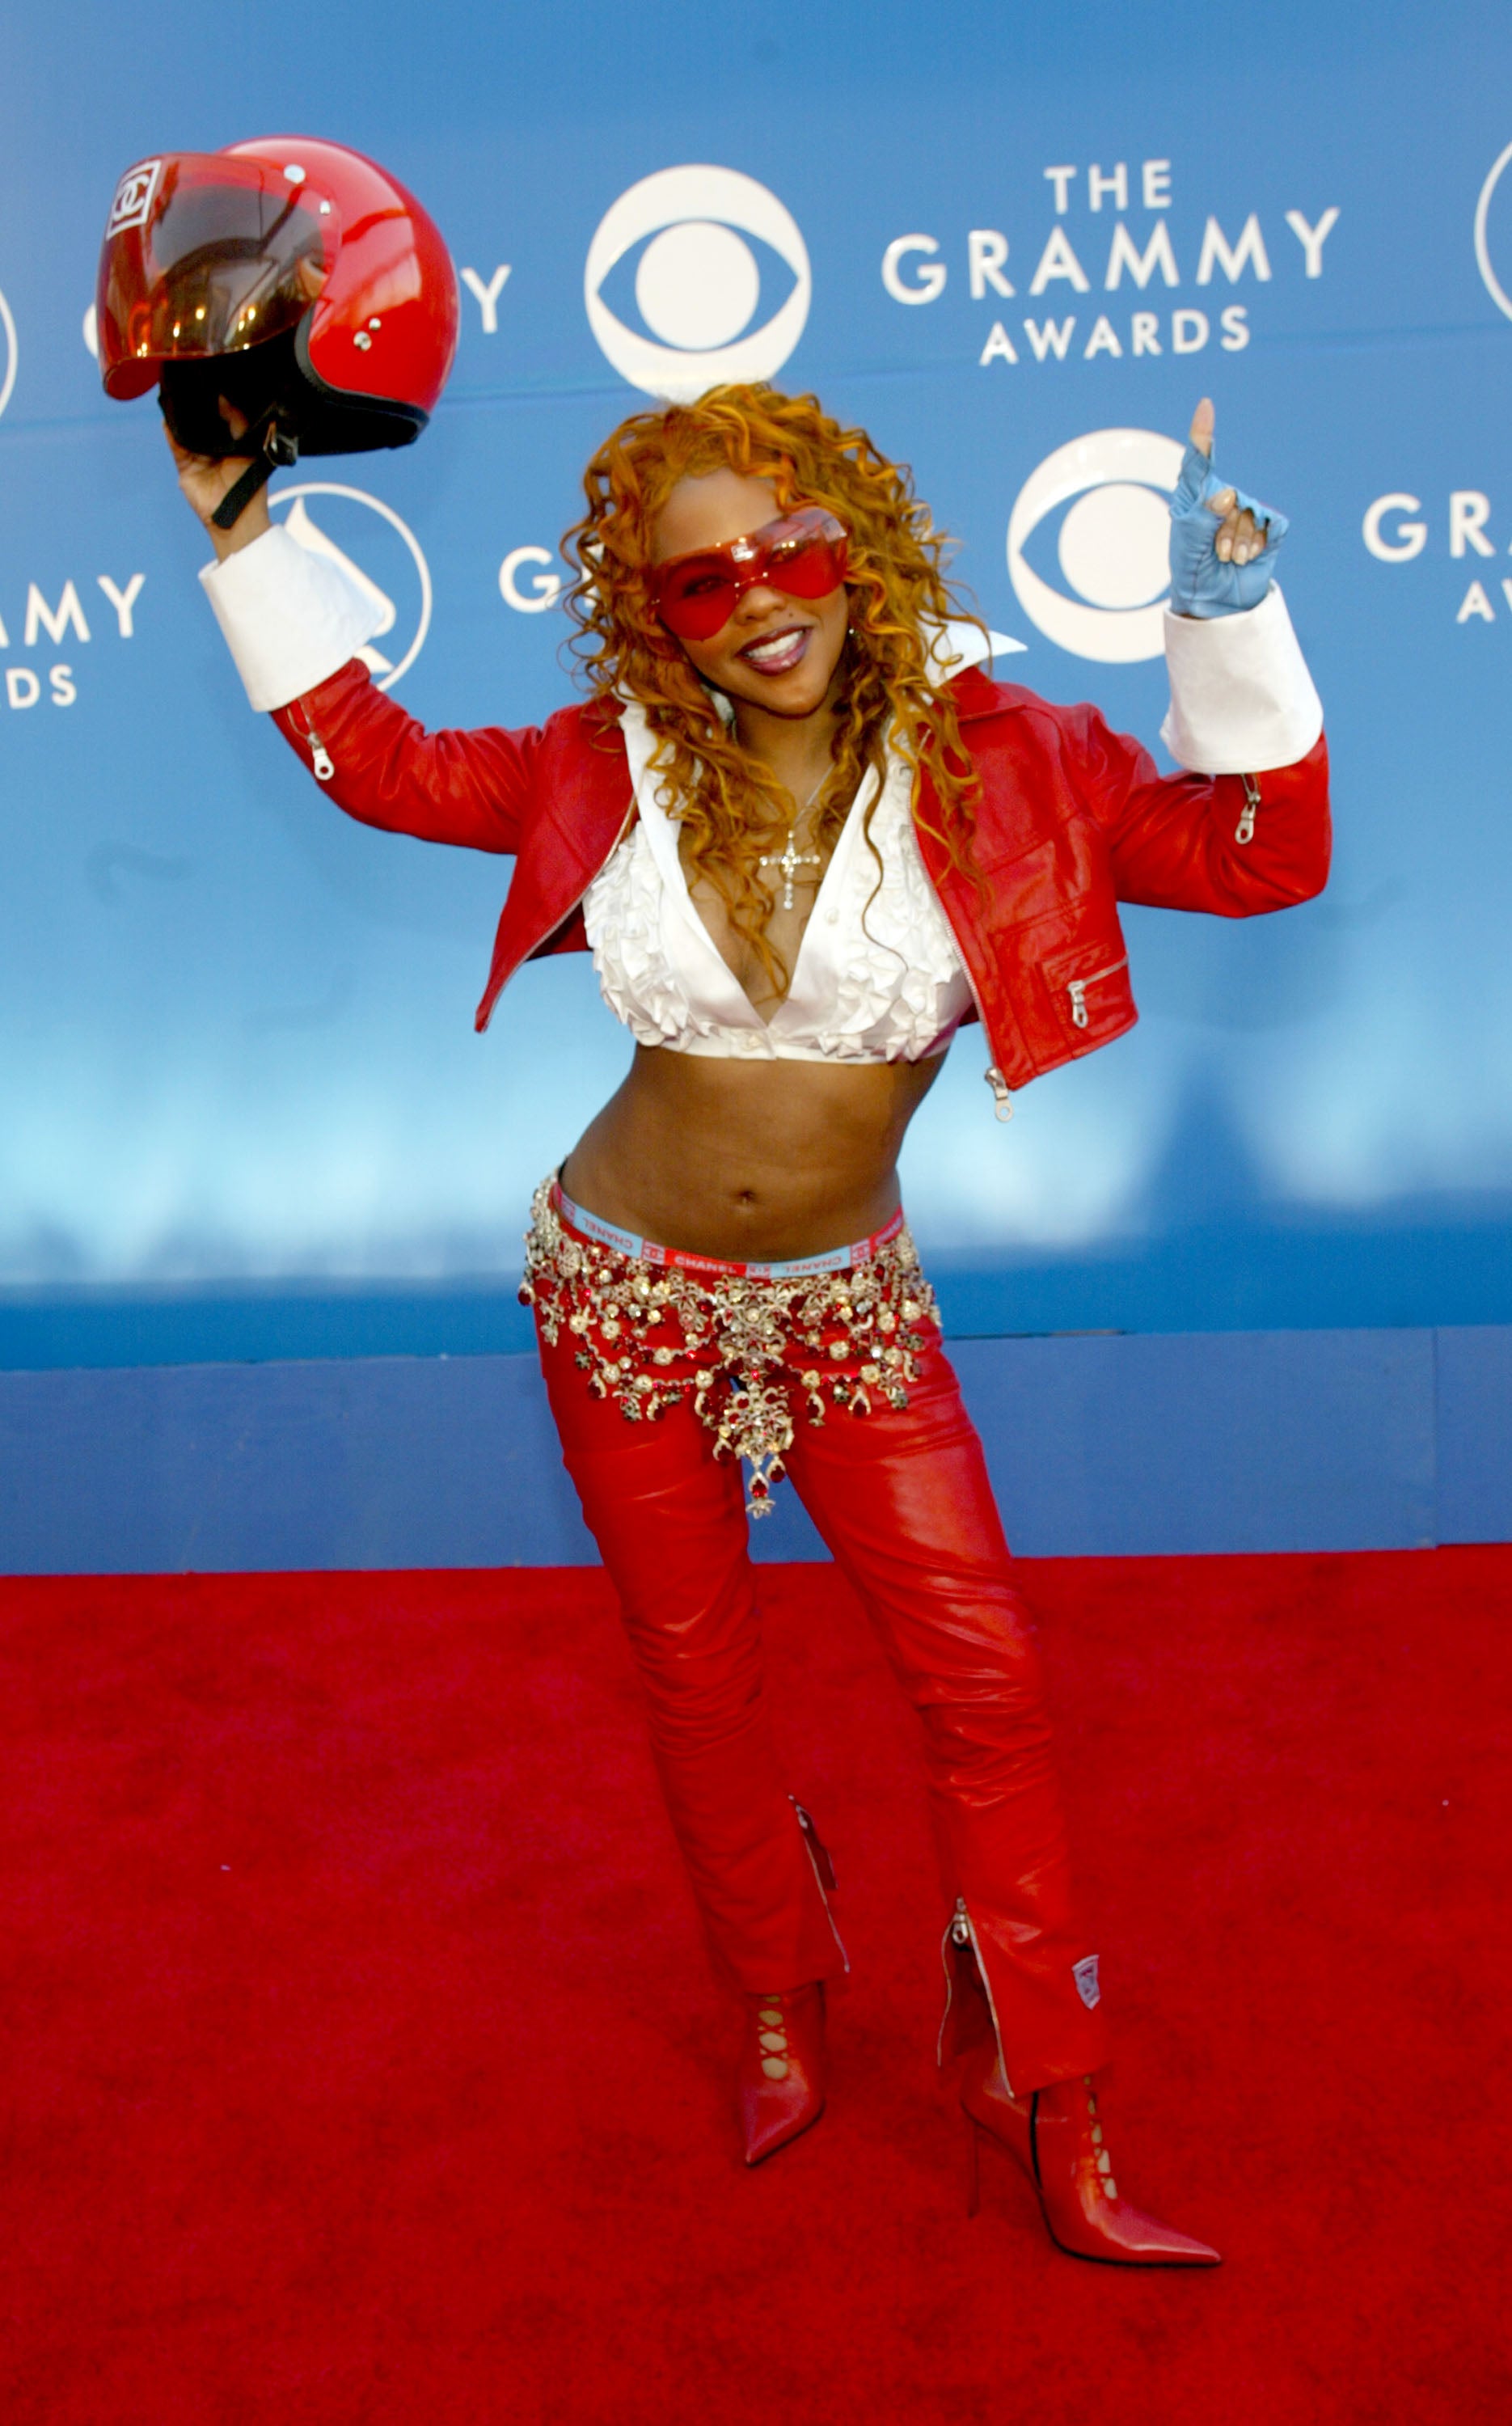 Lil' Kim's Most Outrageous, Show-Stopping Outfits
